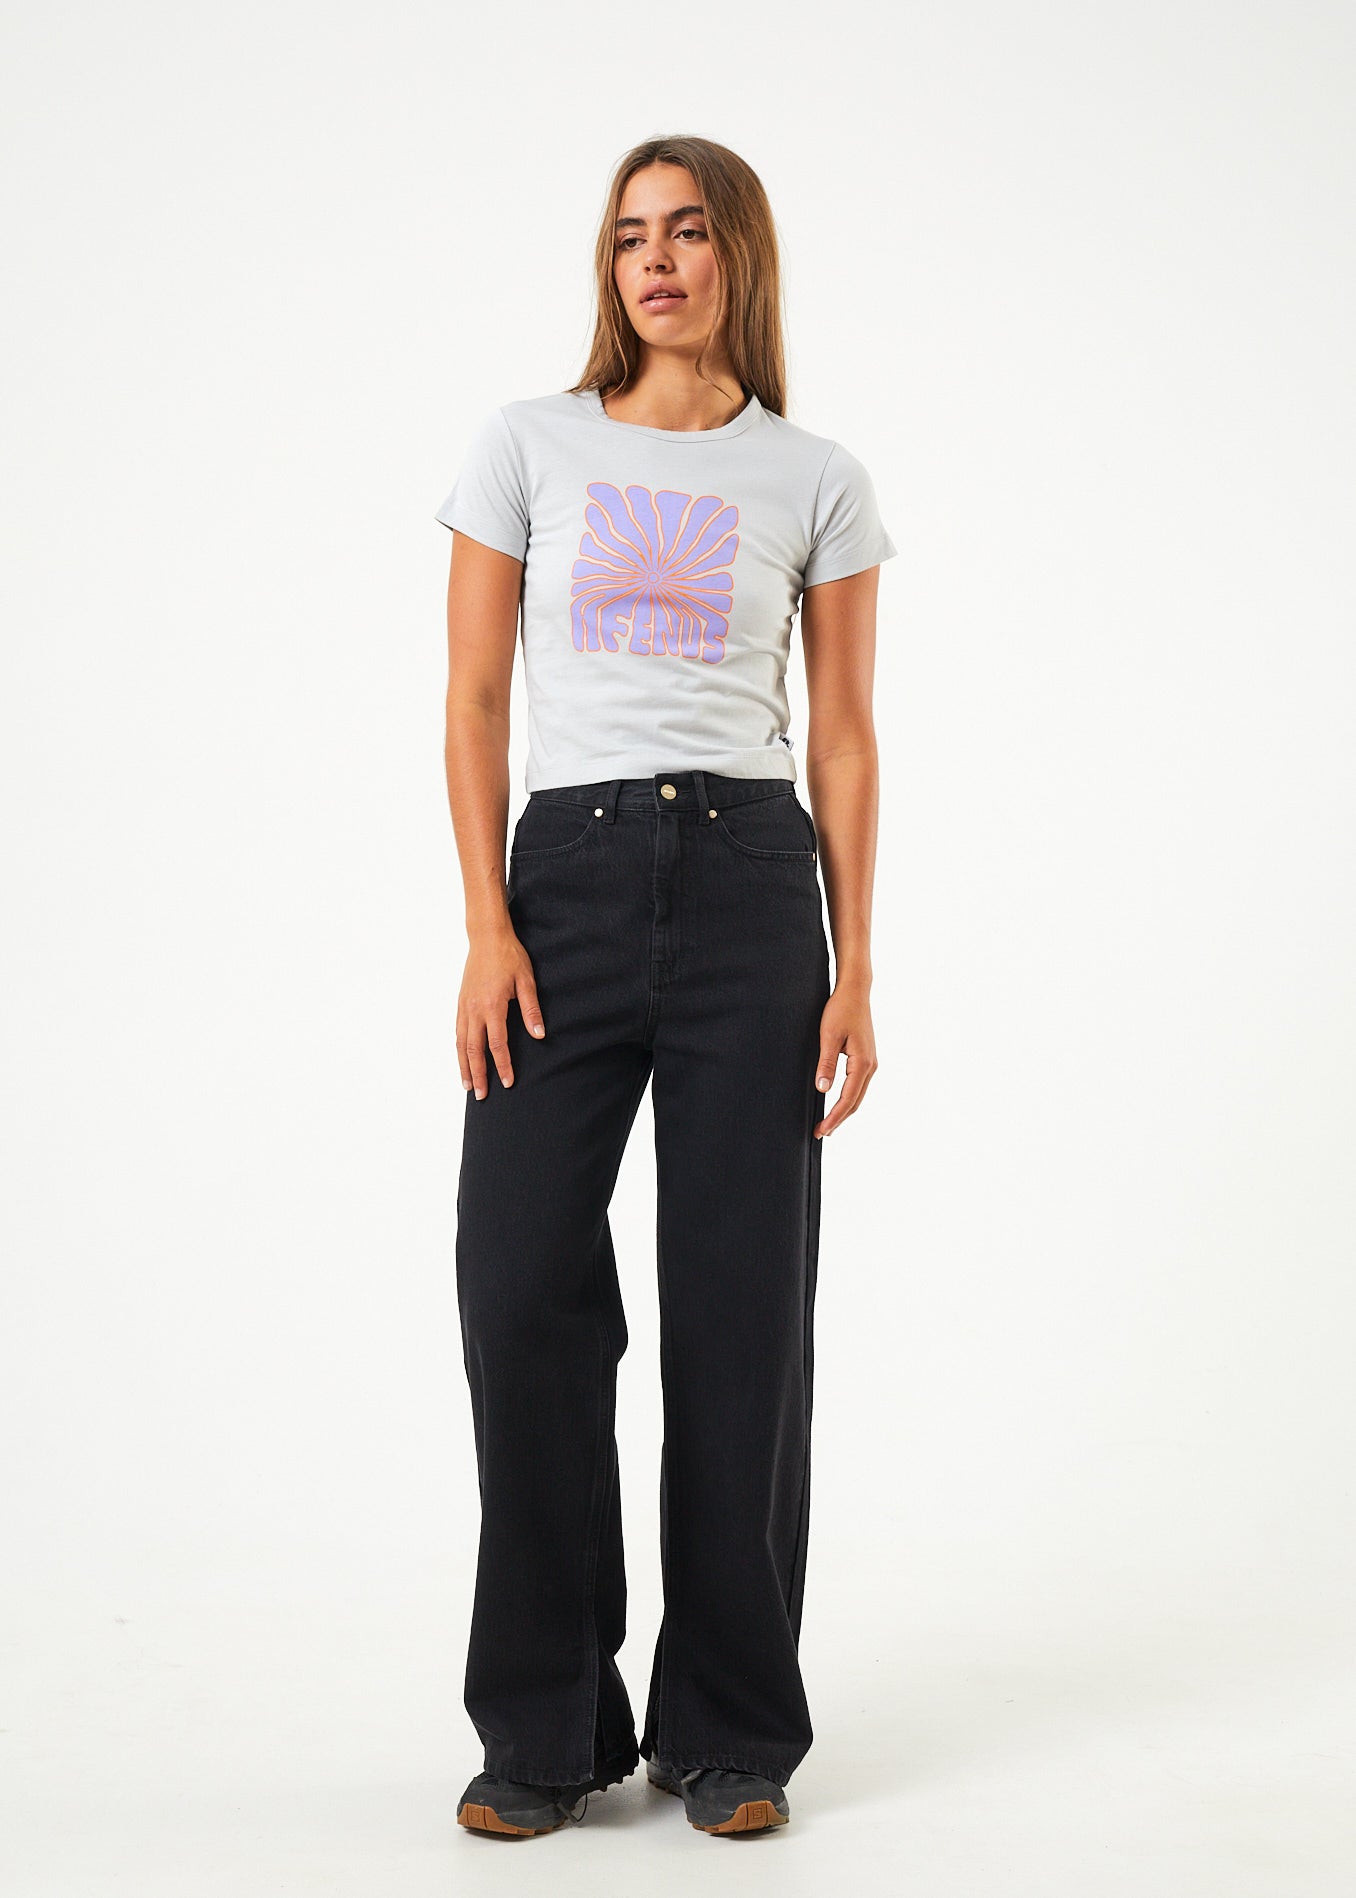 curate, afends, sustainable and ethically made womens apparel, streetwear, graphic tee, baby tee, smoke grey, purple, orange, groovy print, 90s inspired, millennial, gen z apparel, streetwear